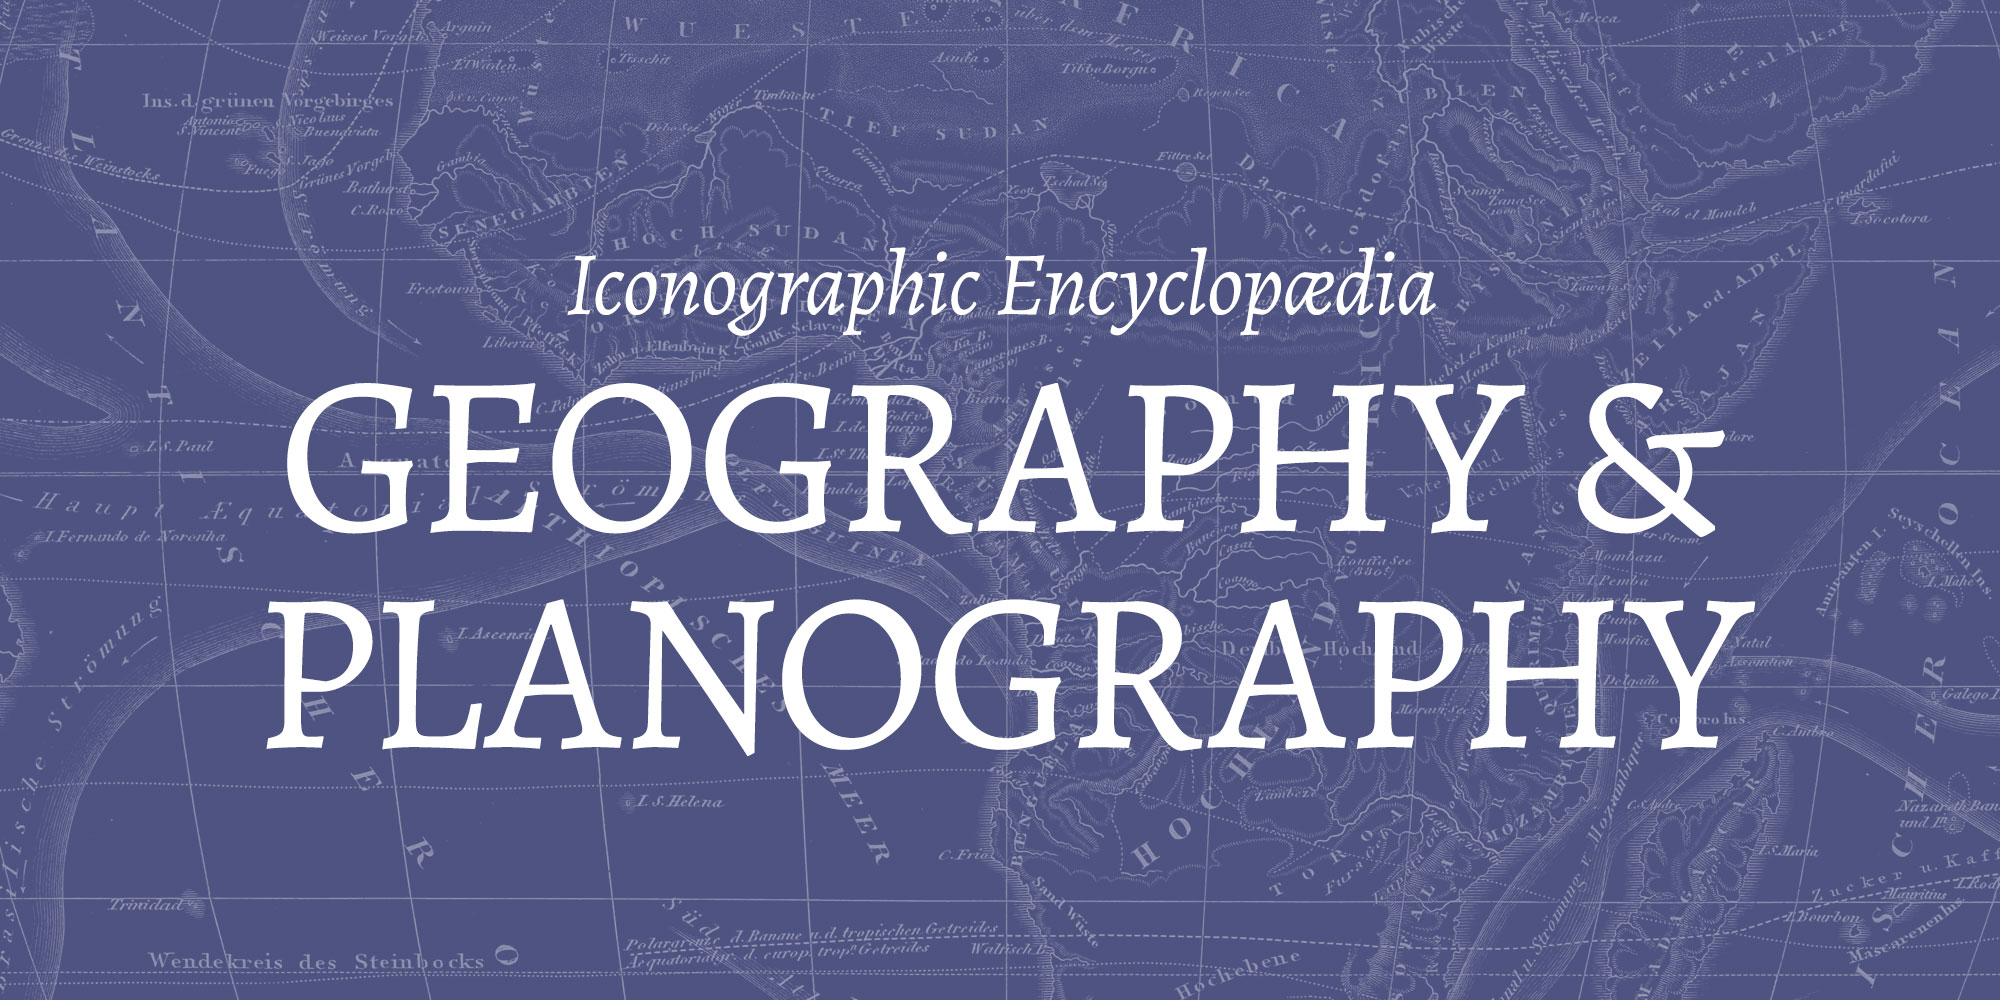 Geography & Planography - Iconographic Encyclopædia of Science